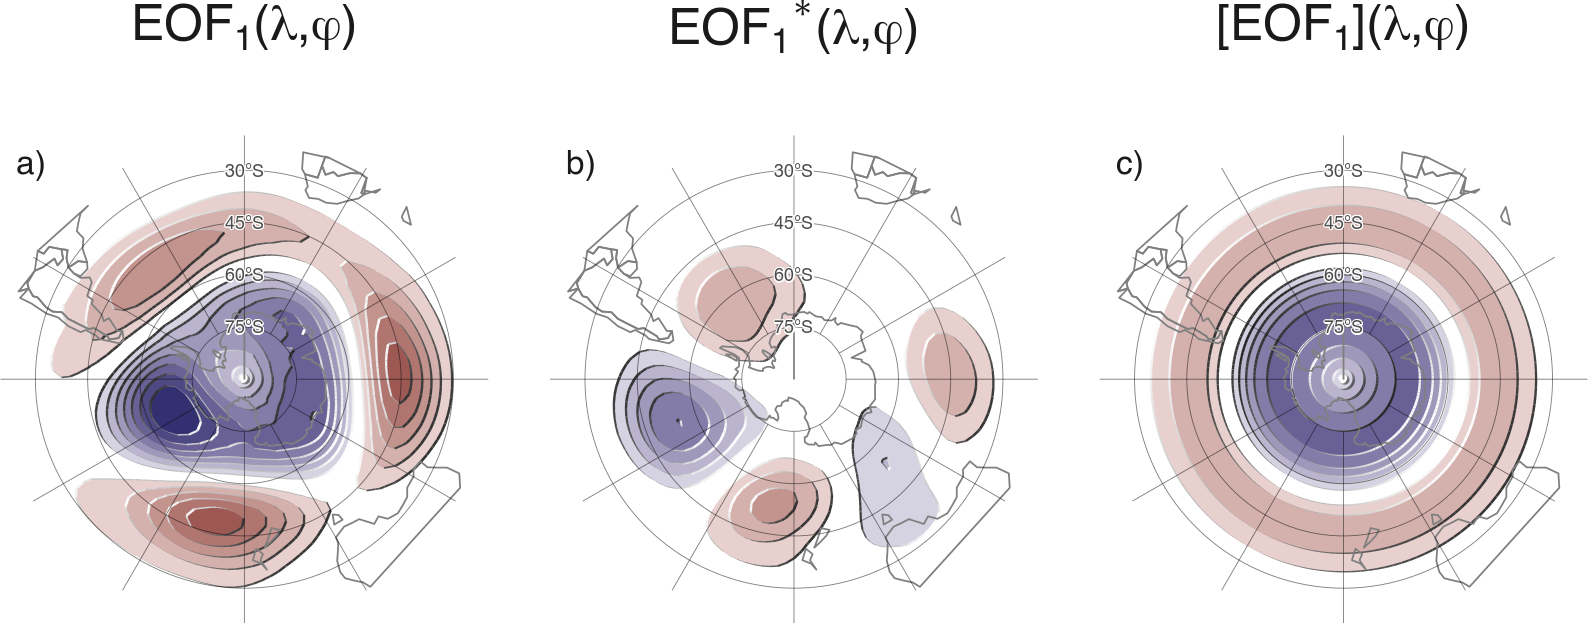 Three polar maps of the southern hemisphere. The first map is titled 'EOF1' and shows a pattern of low values near the center (high latitudes) and high values more to the sides (lower latitudes). The patterns are not completely ring-like. The area of high values have thre distinct local maxima arranged in equal distance. The area of low values has a single local minimum located to the left and between two of the local maxima mentioned before. The next map shows only three areas of high values and one area of low value which coincide with the local maxima and minima from the first figure. The third map shows a perfectly circular area of low values in the center and a perfect ring of high values surrounding it.